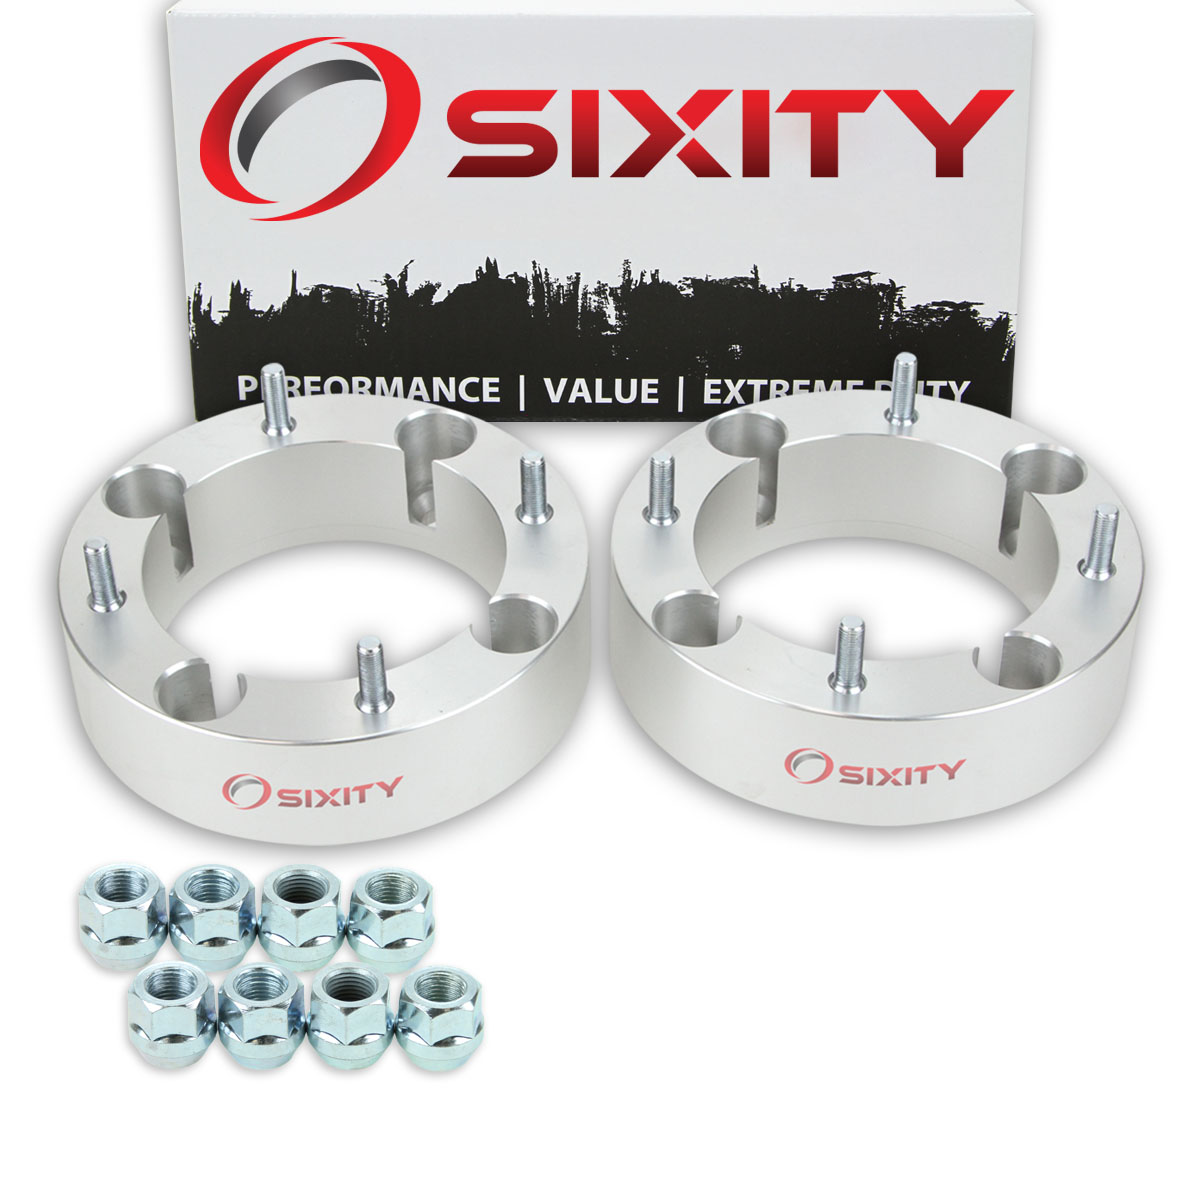 Sixity 2 pc 2 Inch 2000-2006 Polaris Magnum 325 4/156 Rear Wheel Spacers